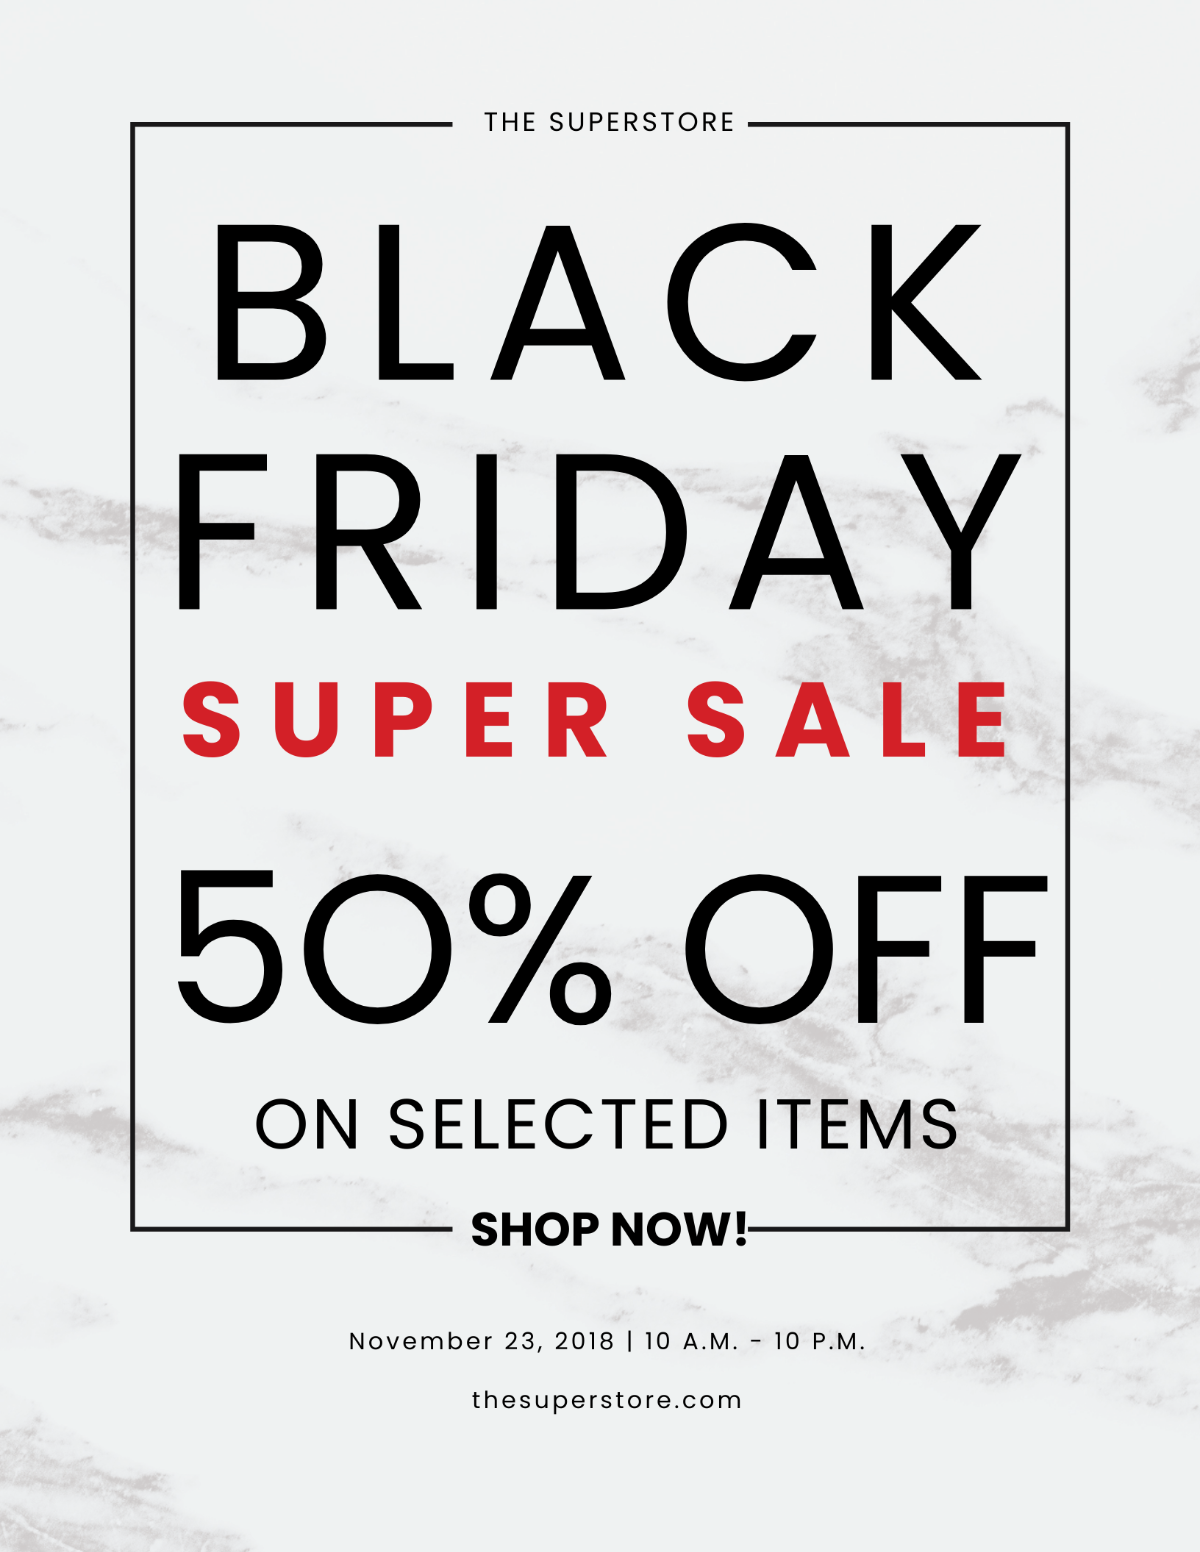 Black Friday Discount Flyer Template